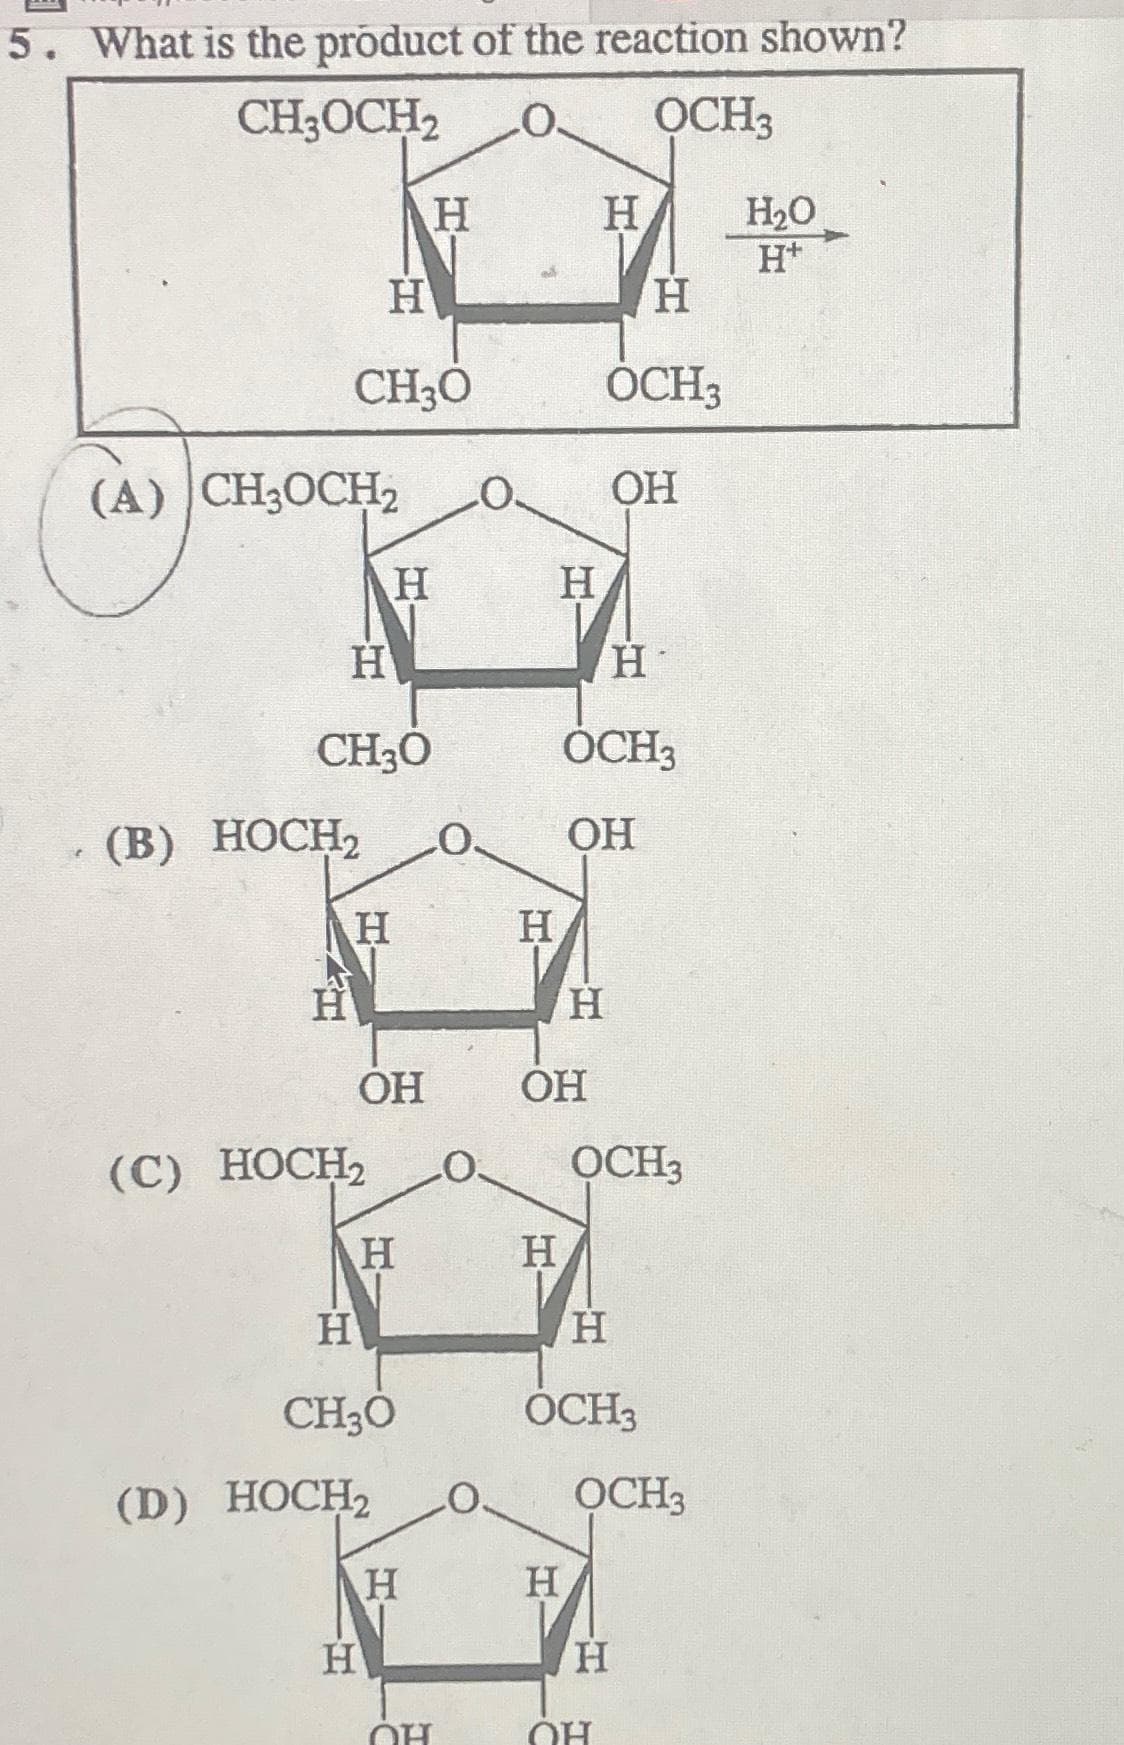 5. What is the product of the reaction shown?
CH3OCH₂
0 OCH3
(A) CH3OCH2
H
CH3O
(B) HOCH2
Н
H
CH3O
Н
(C) HOCH2
ОН
Н
H
H
Н
CH3O
(D) HOCH2
Н
Н
О
Н
0. ОН
H
Н
OH
Н
Н
Н
H
OCH3
ОН
Н
OCH3
OCH3
Н
OCH3
OCH3
T
Н
H2O
H+